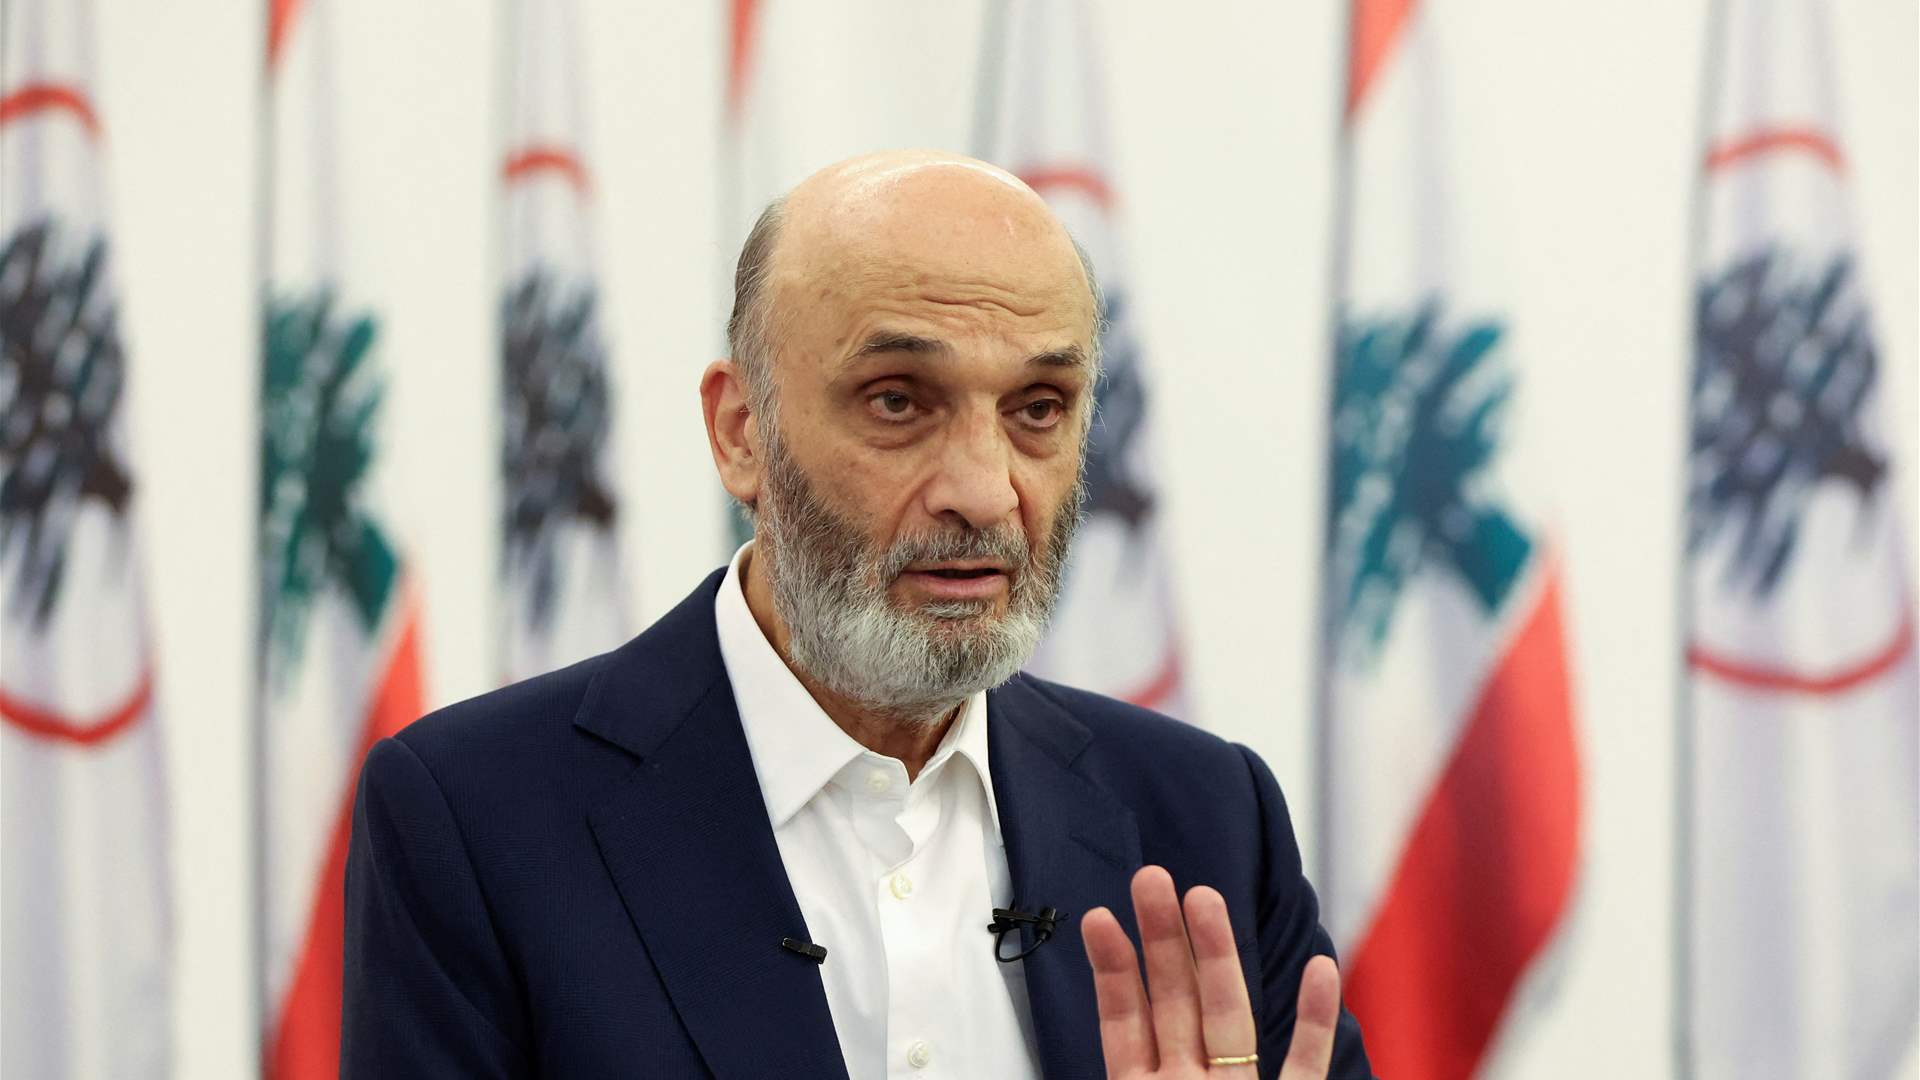 No new names proposed: Geagea&#39;s statement after meeting Le Drian